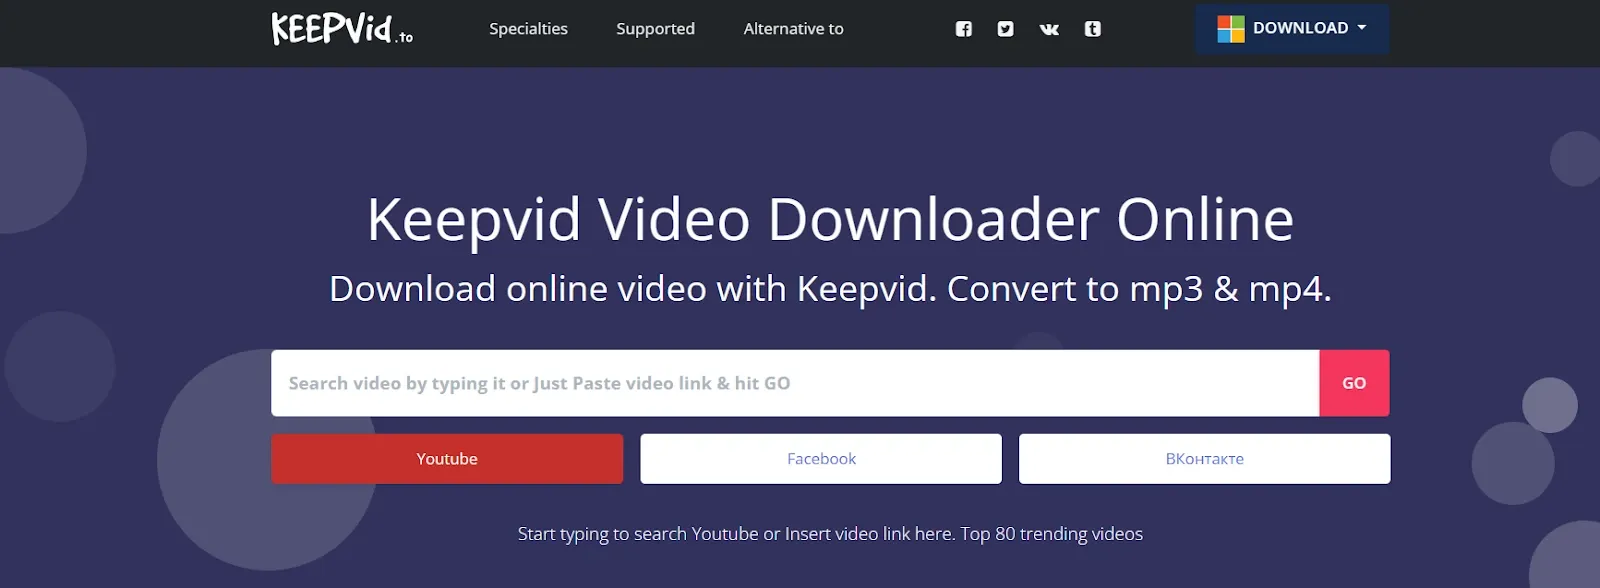 Websites To Download YouTube Shorts